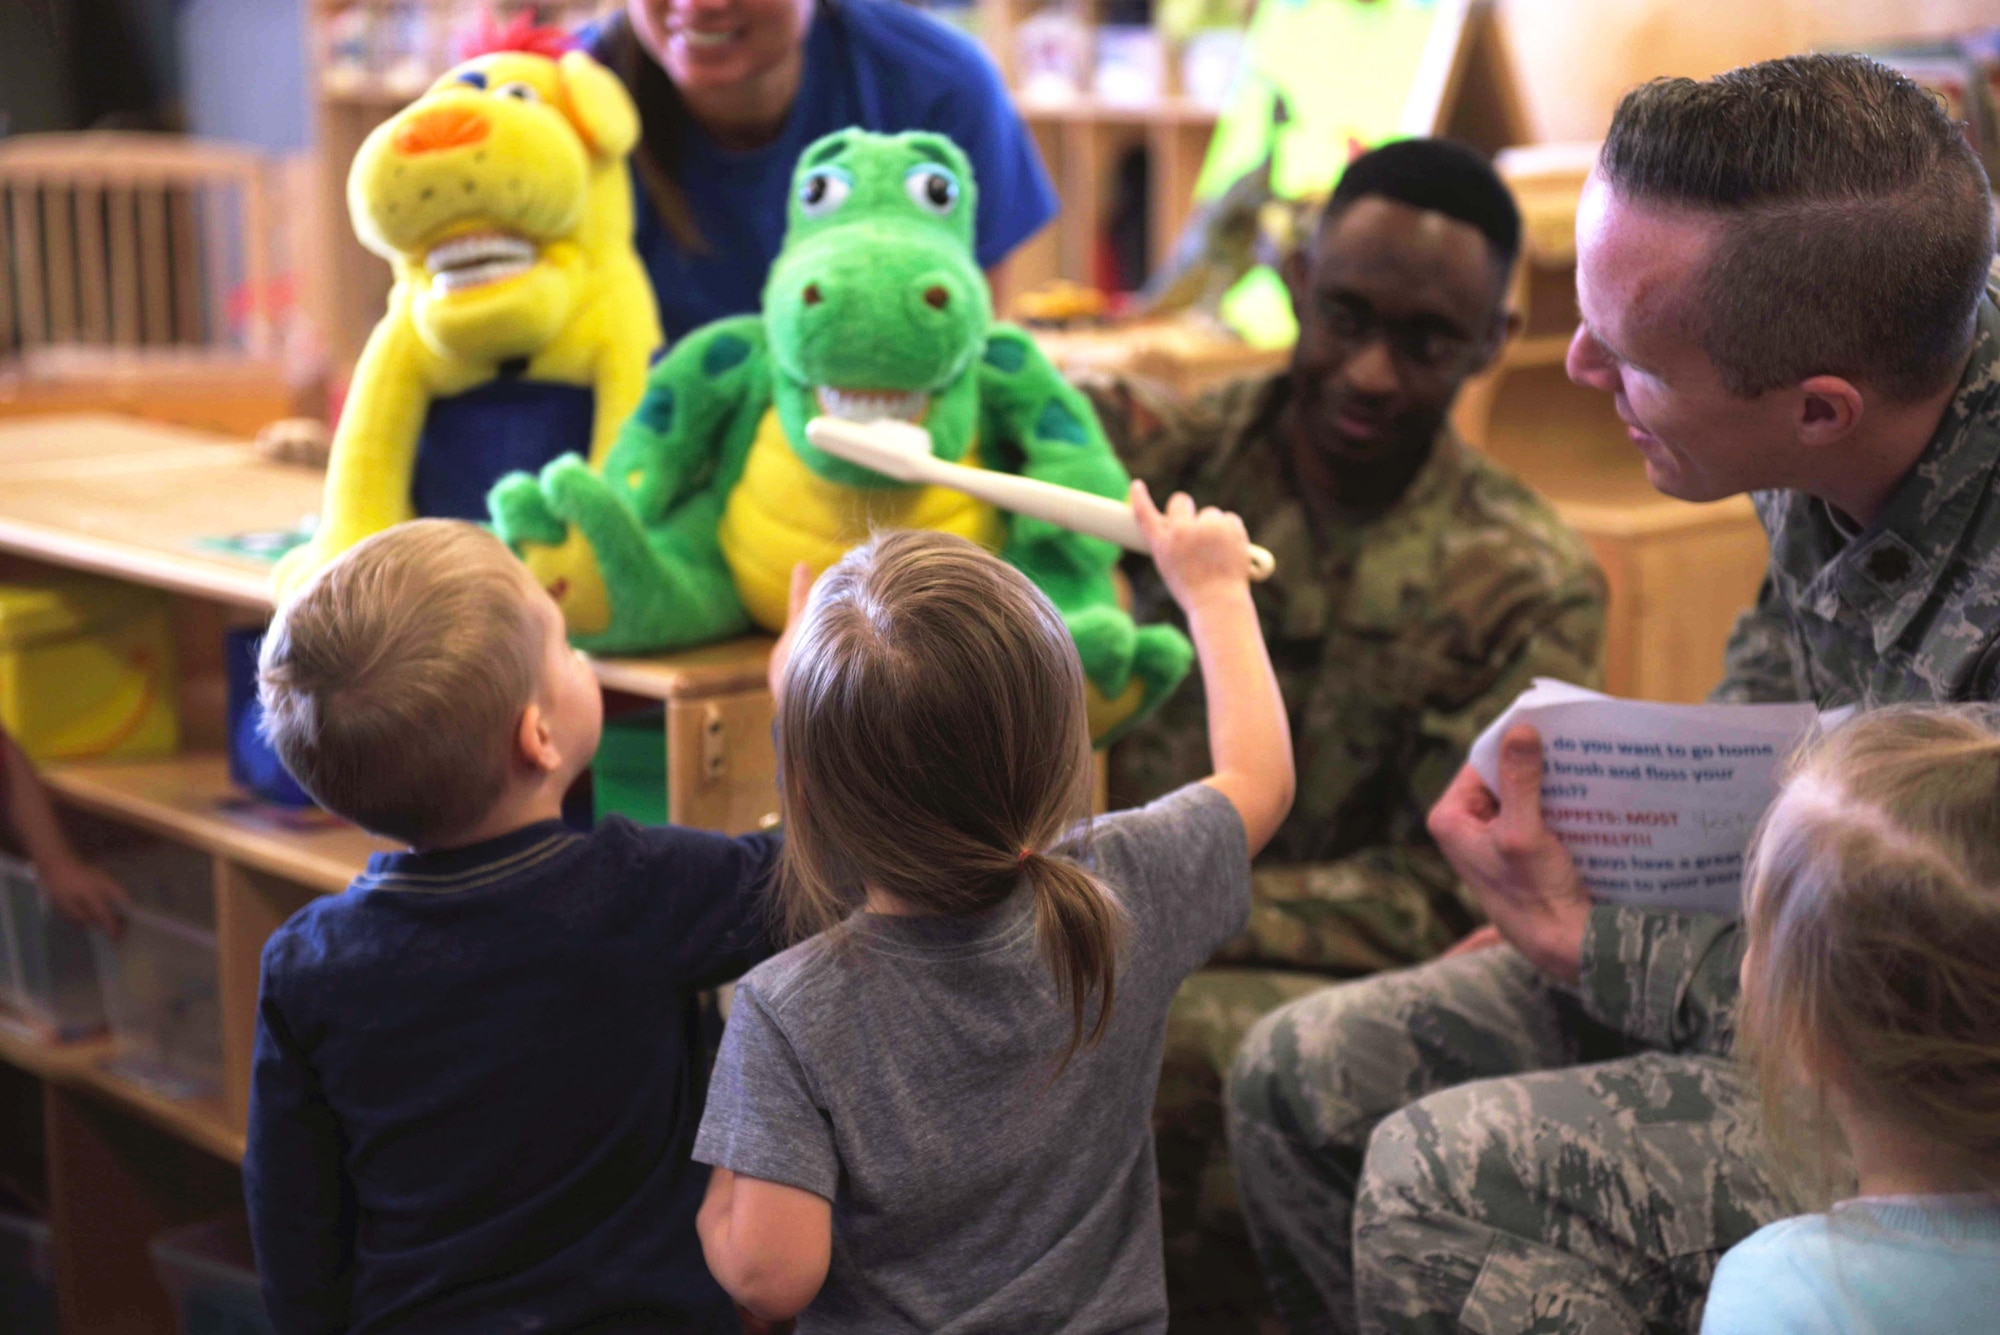 U.S. Air Force Staff Sgt. Myron Little, 325th Medical Group noncommissioned office in charge of dental logistics (right), and U.S. Air Force Maj. Nicholas Einbender, 325th MDG dentist, watch as children pretend to brush the teeth of a puppet during a dental demonstration at Tyndall Air Force Base, Florida, Feb. 27, 2020. February is National Children's Dental Health Month, and the 325th MDG's dental team reached out to the 325th Force Support Squadron's Child and Youth Program Center (formerly known as the Child Development Center) to teach young children the importance of brushing and flossing teeth. (U.S. Air Force photo by Staff Sgt. Magen M. Reeves)